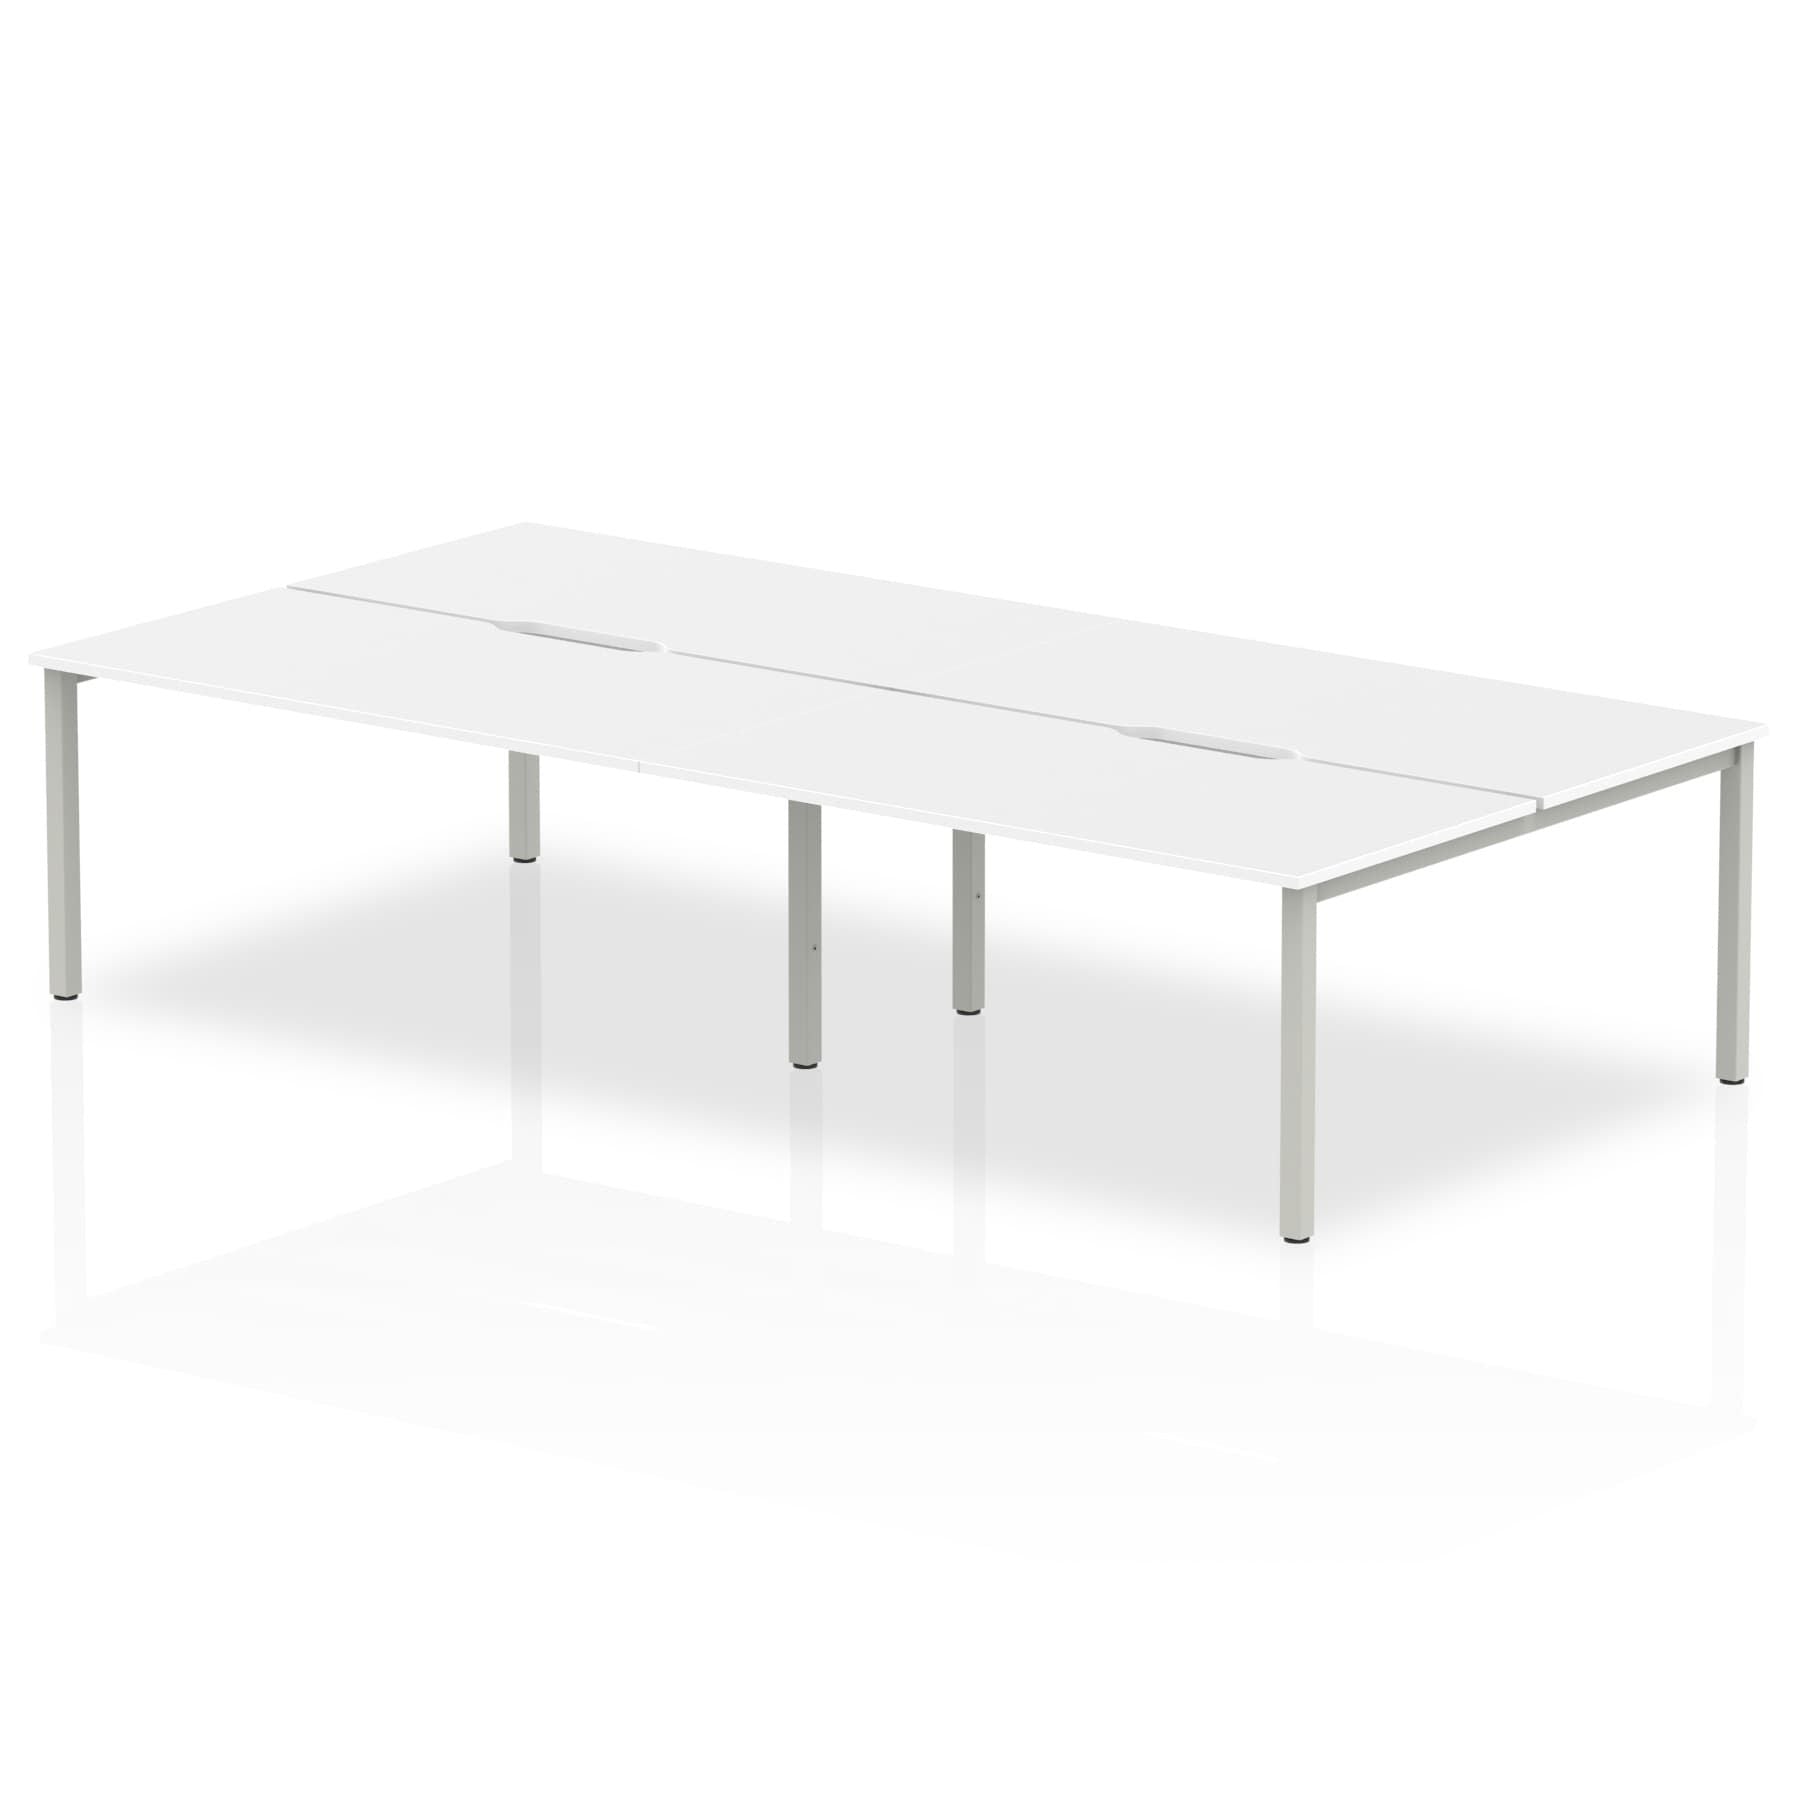 Evolve Plus B2B 4-Person Desk - Rectangular MFC, Self-Assembly, 5-Year Guarantee, 2400-3200mm Width, Silver/White Frame